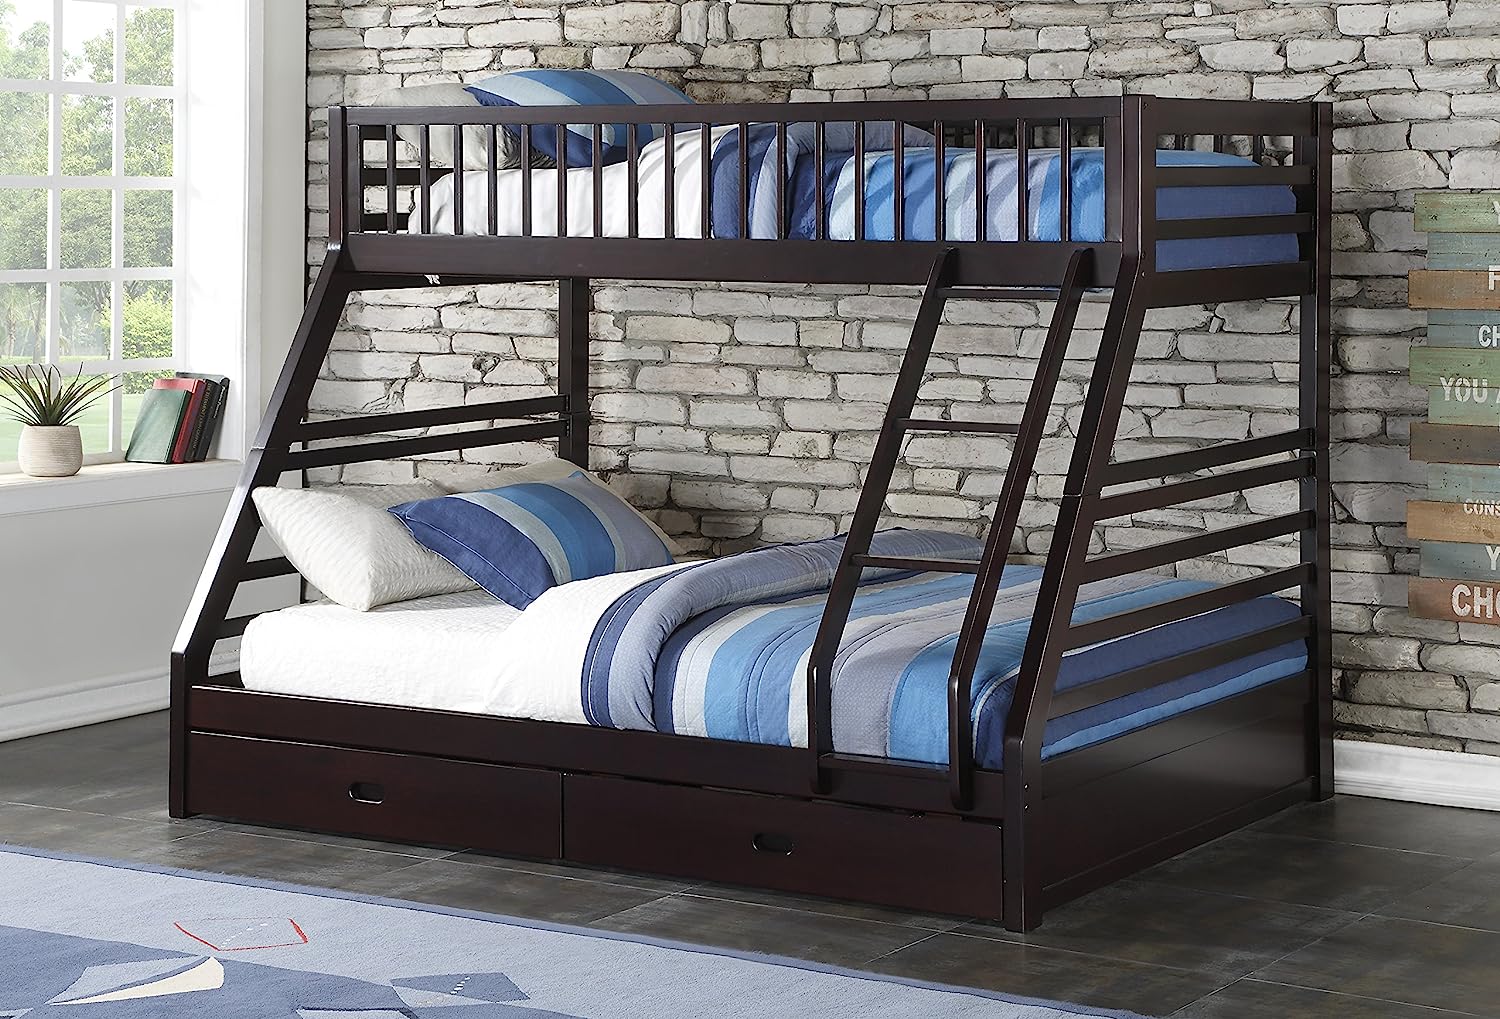 Acme Furniture XL Twin/Queen Bunk Bed with Drawers, Espresso (AC-37425)